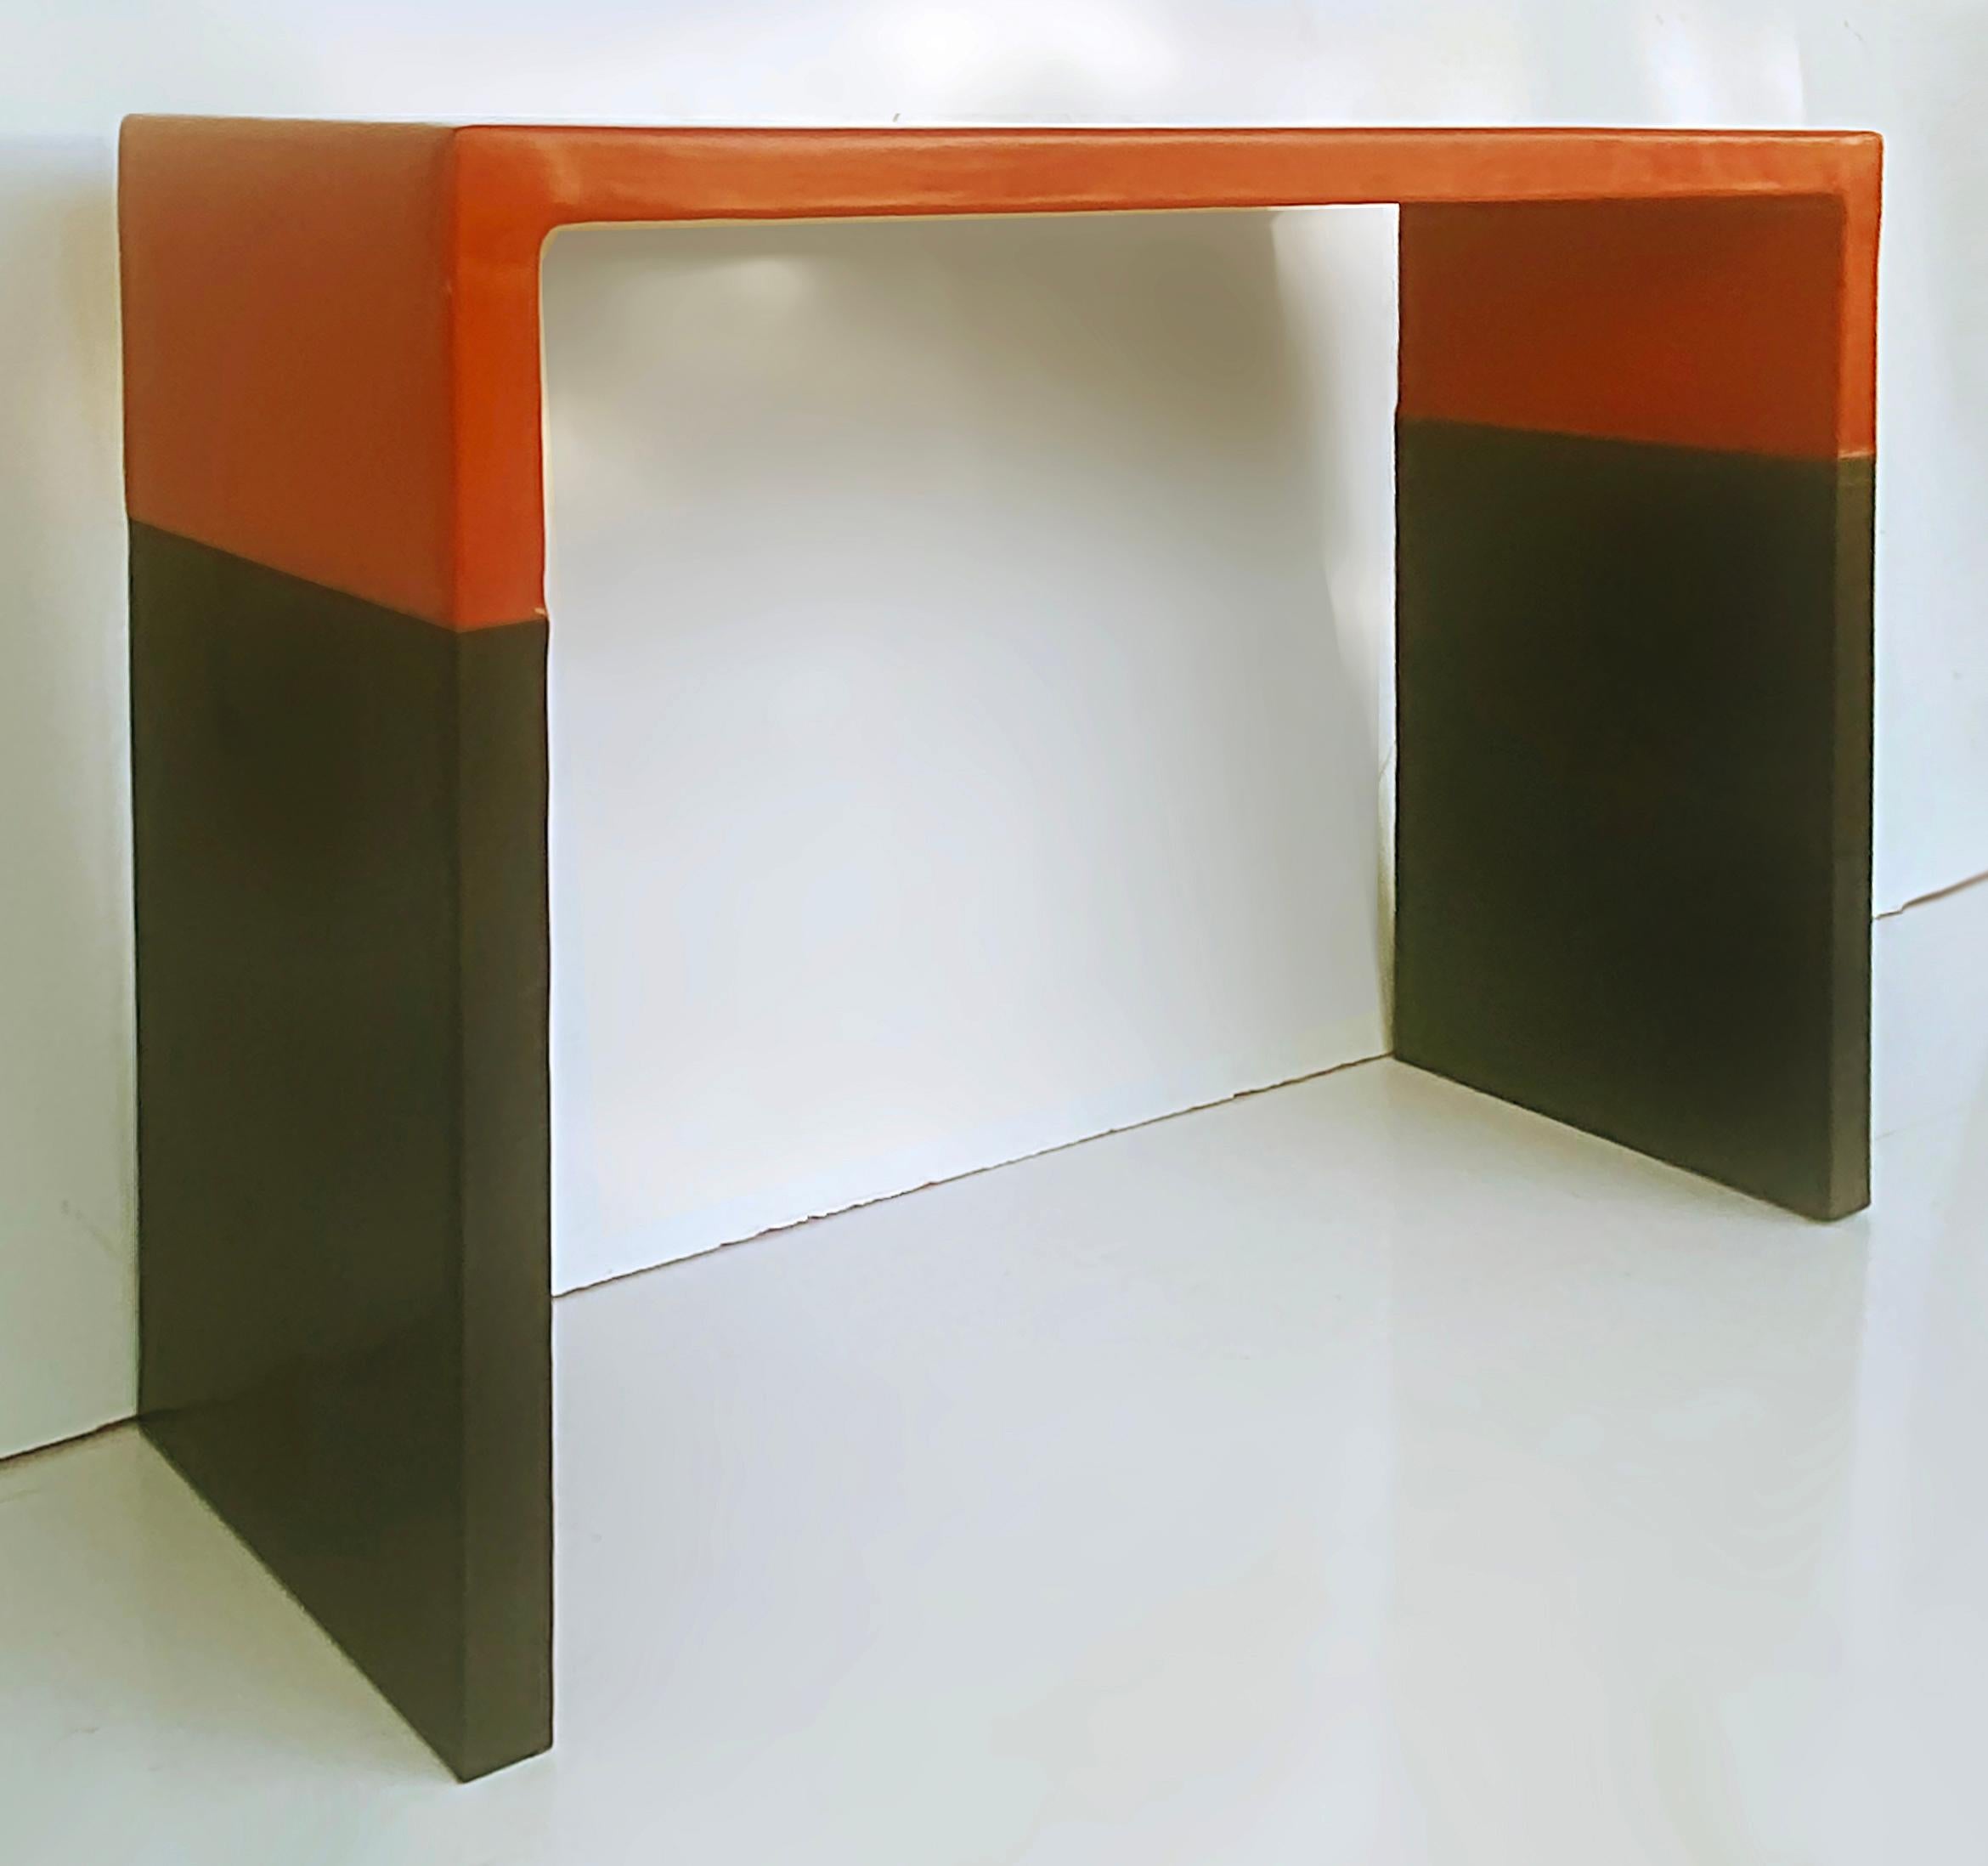 Robert Kuo Baker Furniture Lacquer, Copper Console Table, circa 2000

Offered for sale is a rare and important Robert Kuo design for Baker Furniture. This console parson's table is copper that has been lacquered in orange and was created circa